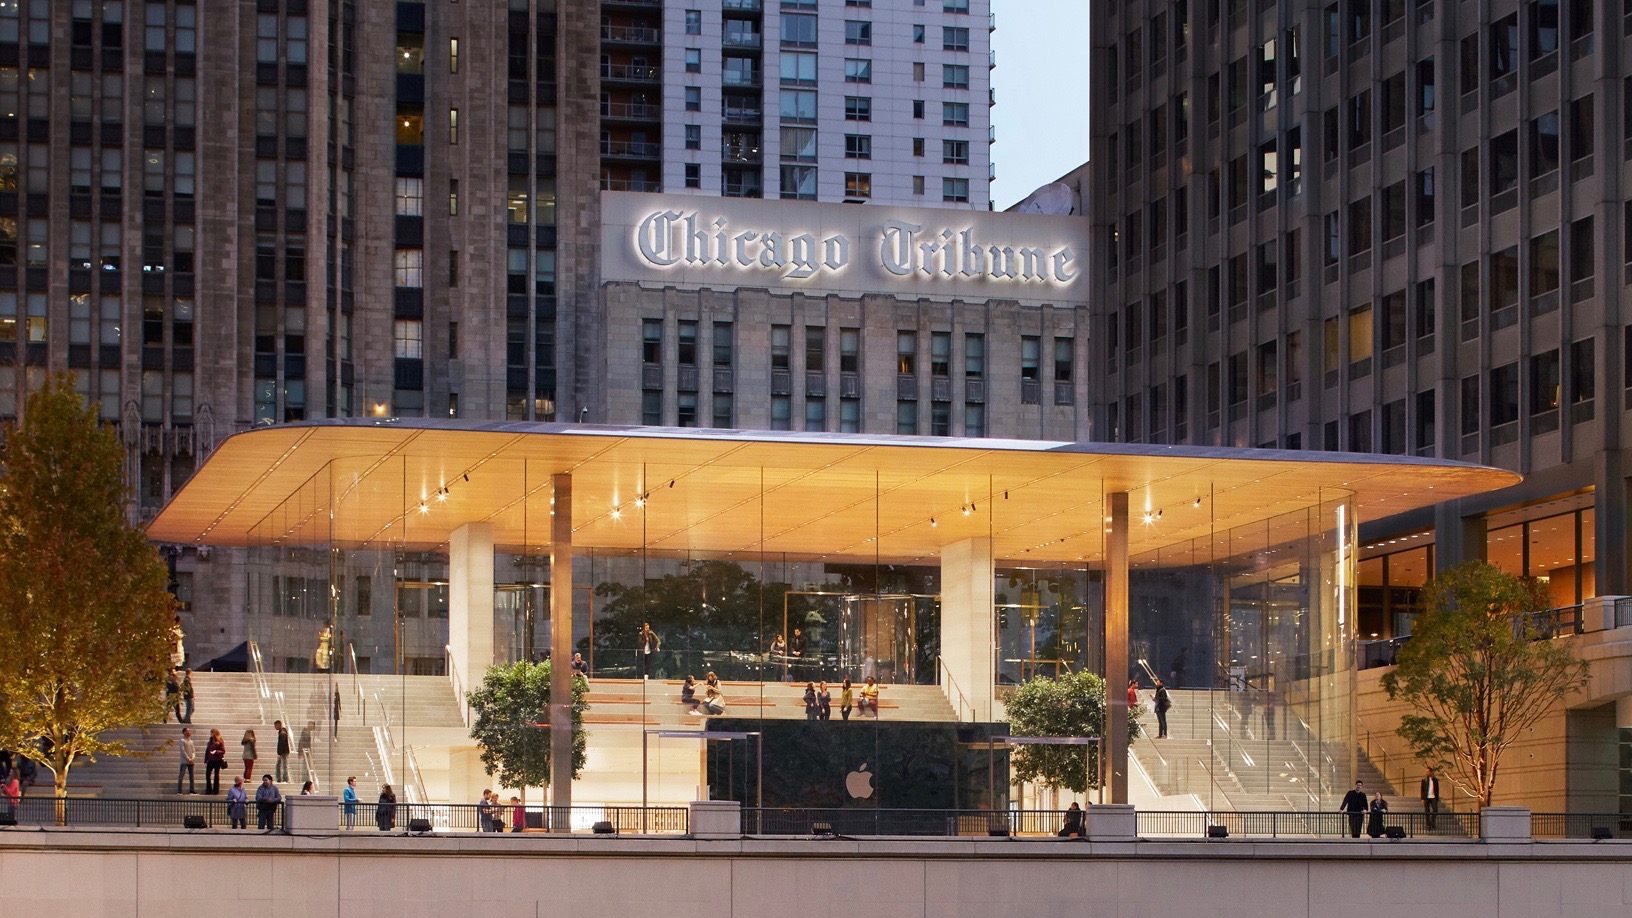 Ambitious' Apple Store Put Up For Sale by Chicago Landlord - WSJ